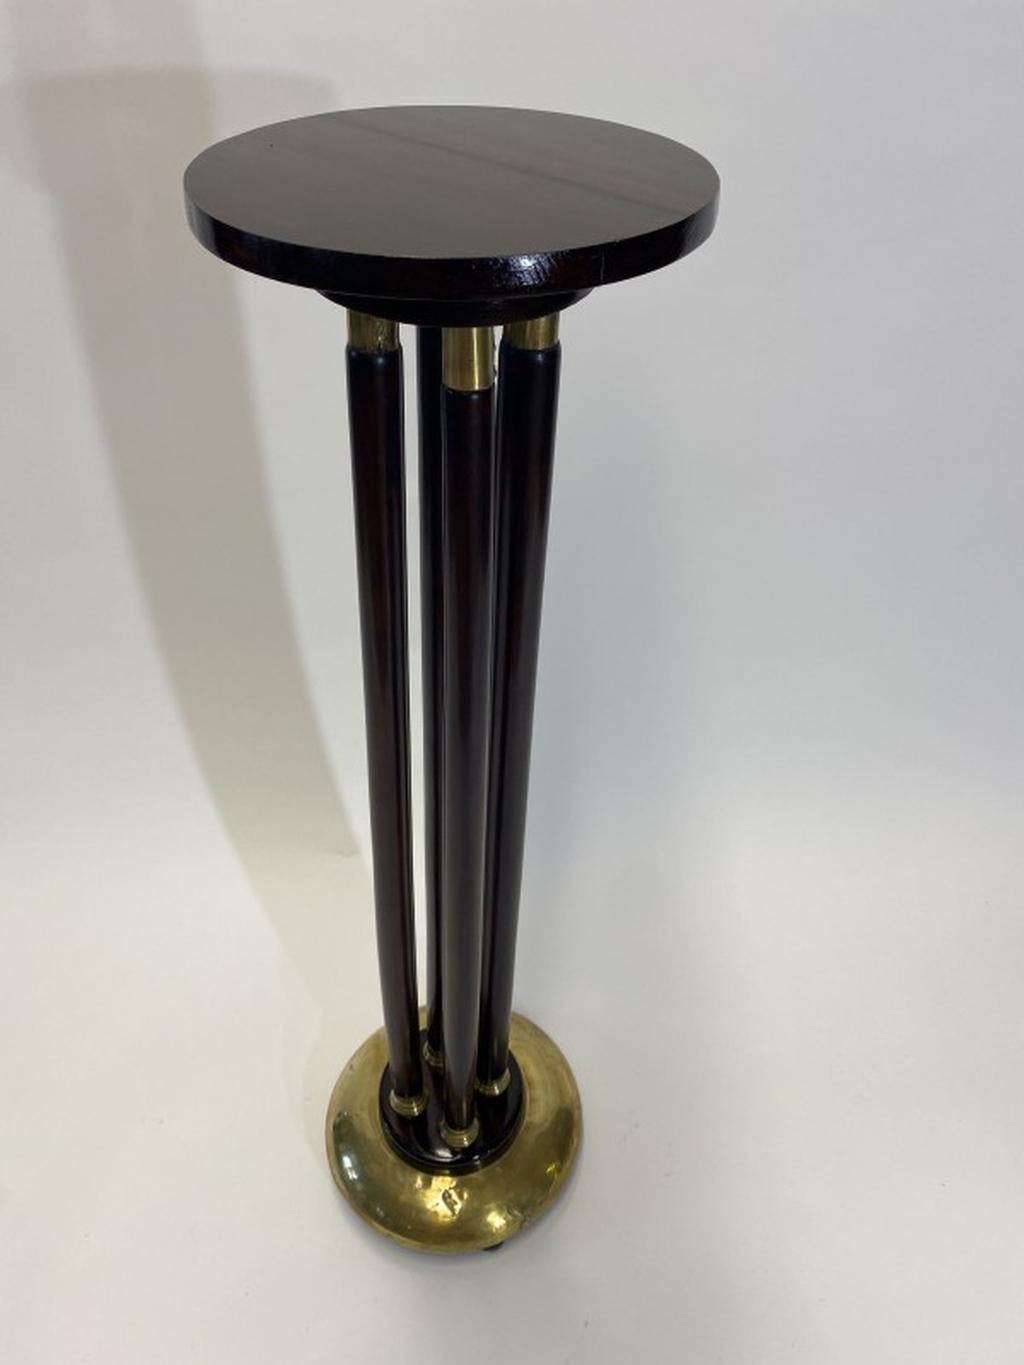 Secession pedestal with brass fittings. Professionally stained and repolished.